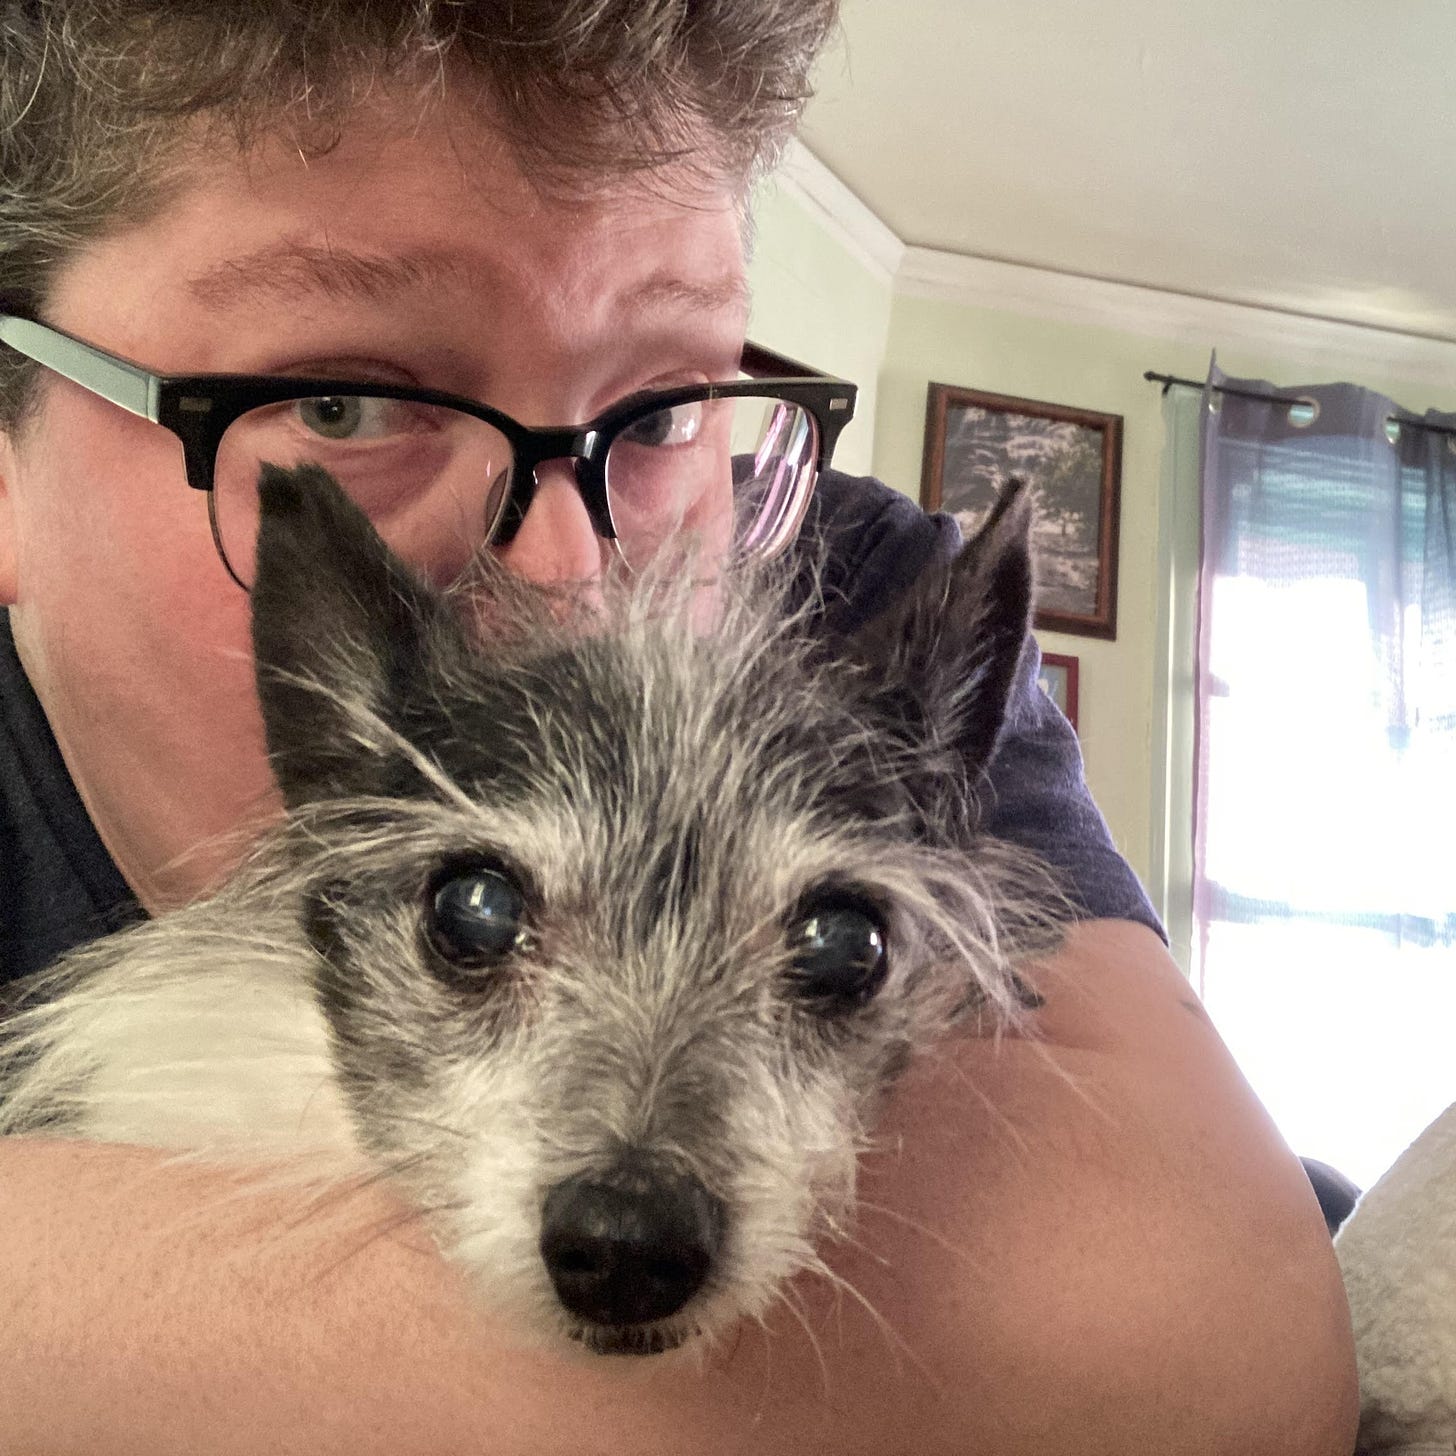 nonbinary person with glasses holding a small black and white dog.